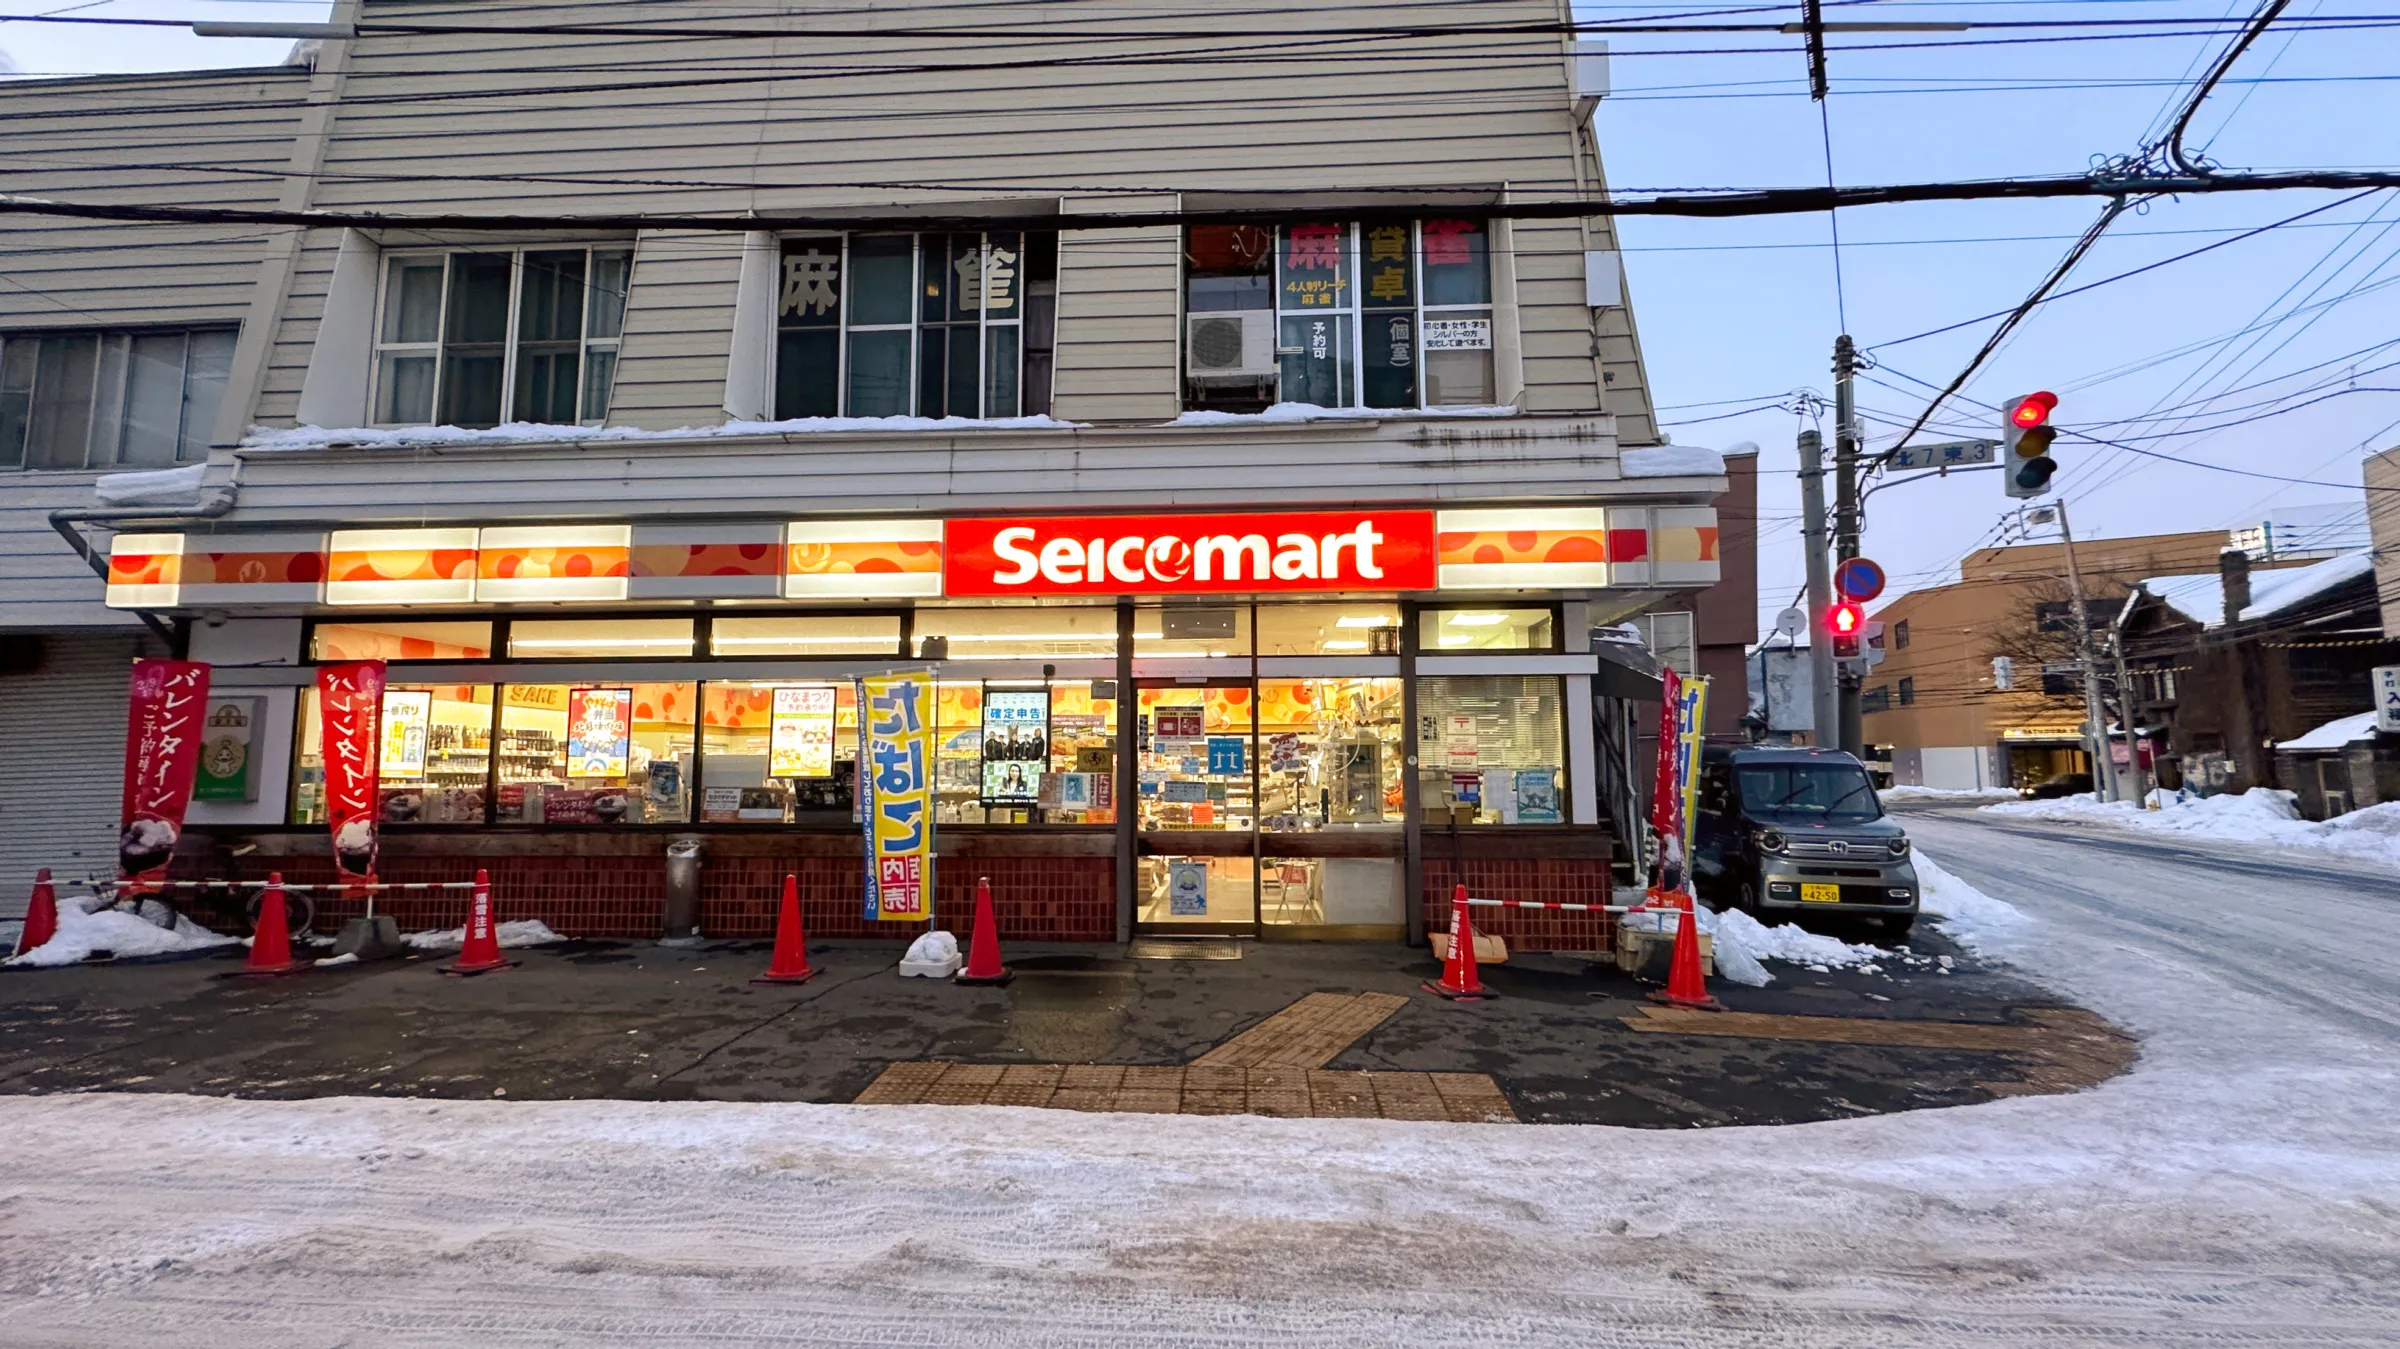 Seicomart in Japan, east_asia | Organic Food,Dairy,Groceries,Baked Goods,Meat - Country Helper